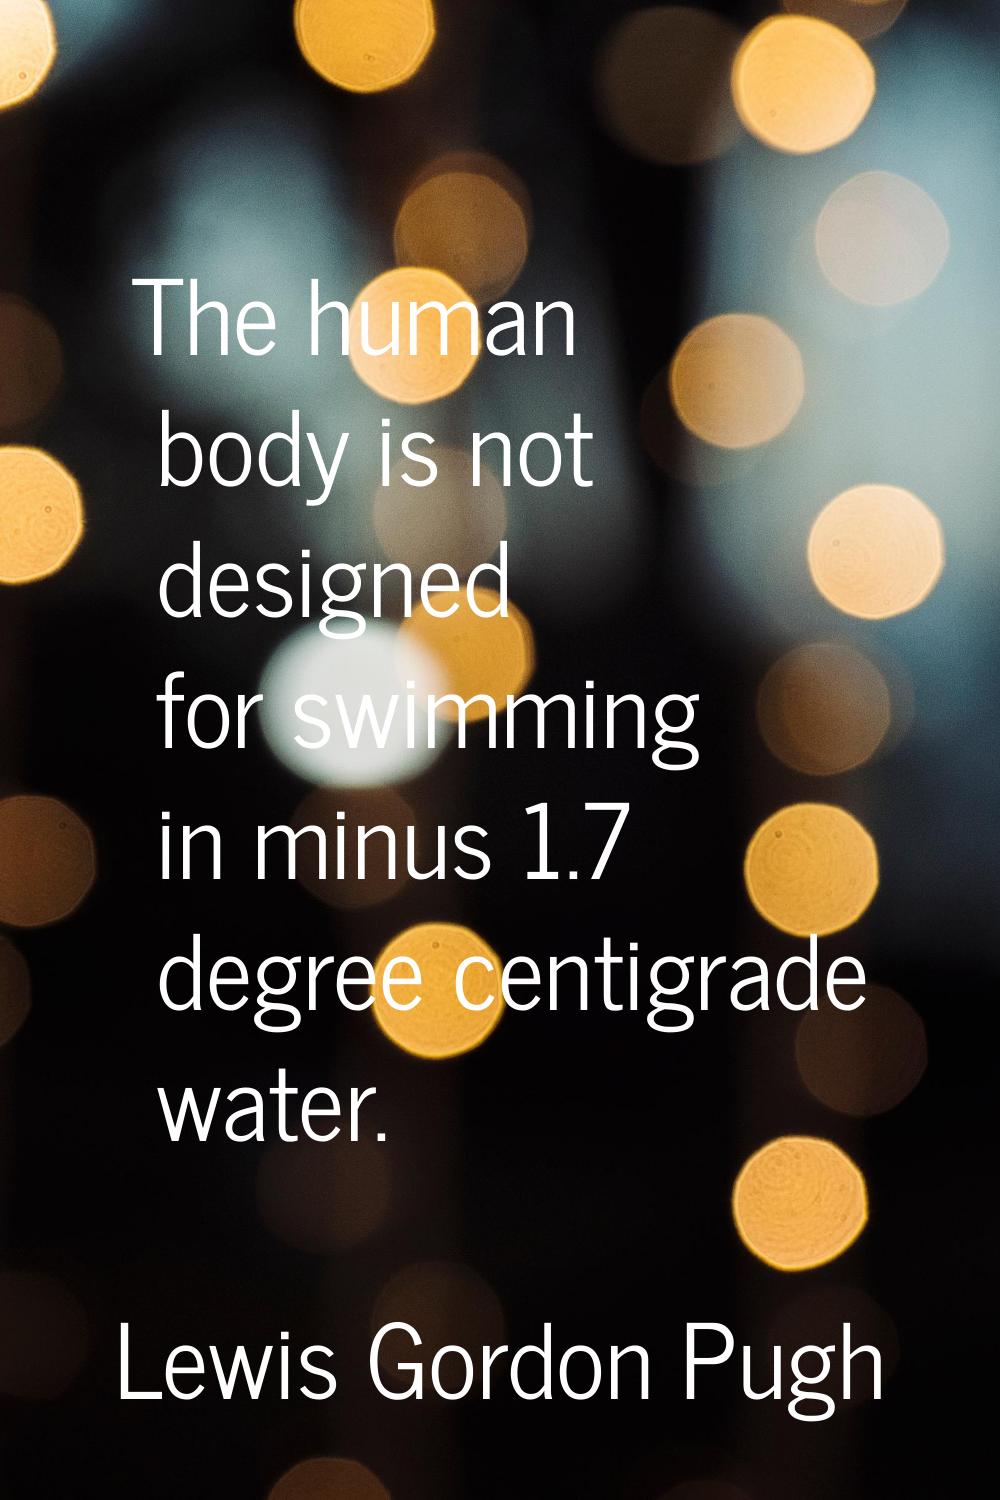 The human body is not designed for swimming in minus 1.7 degree centigrade water.